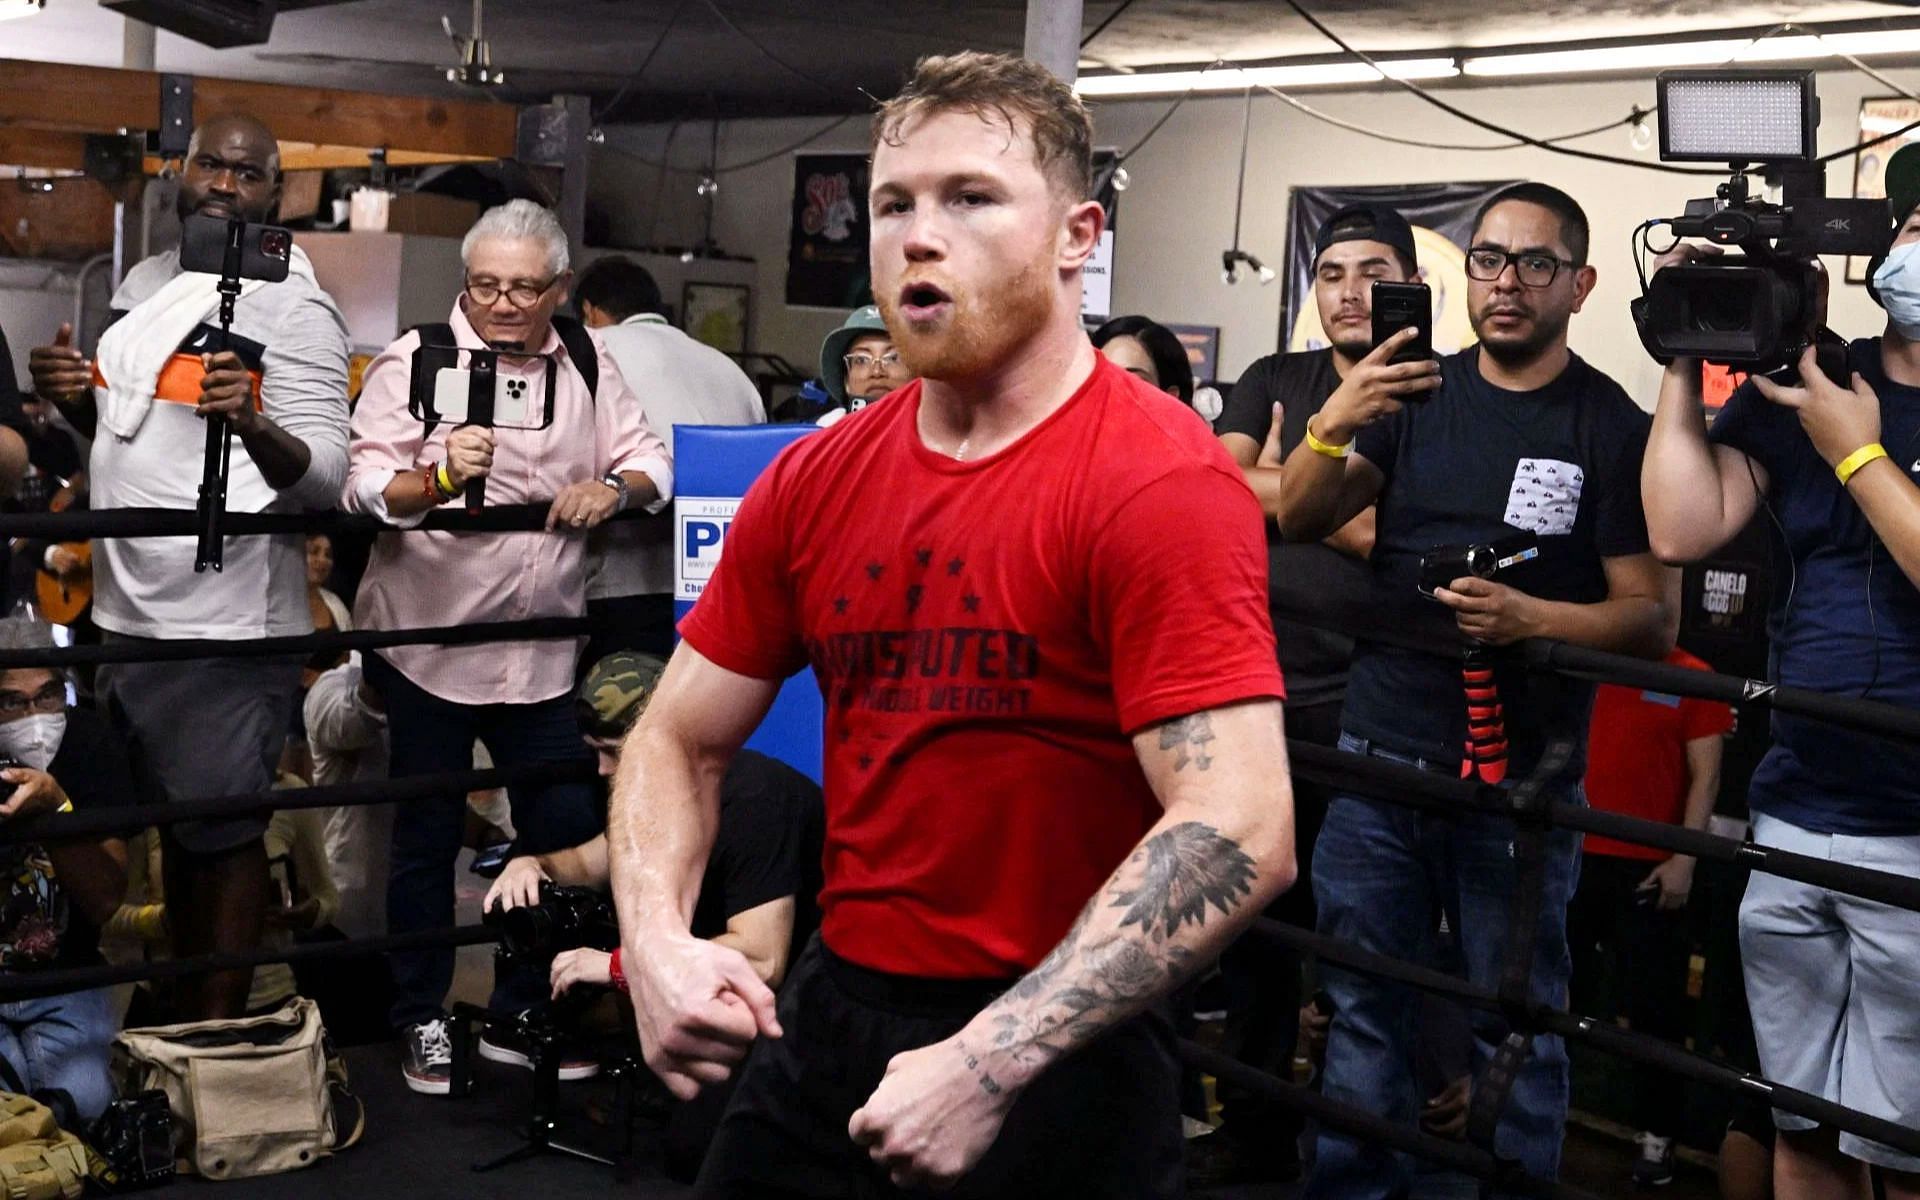 Undisputed super middleweight champion Canelo Alvarez (pictured) will fight anybody, says promoter Eddie Hearn [Image Courtesy: @GettyImages]